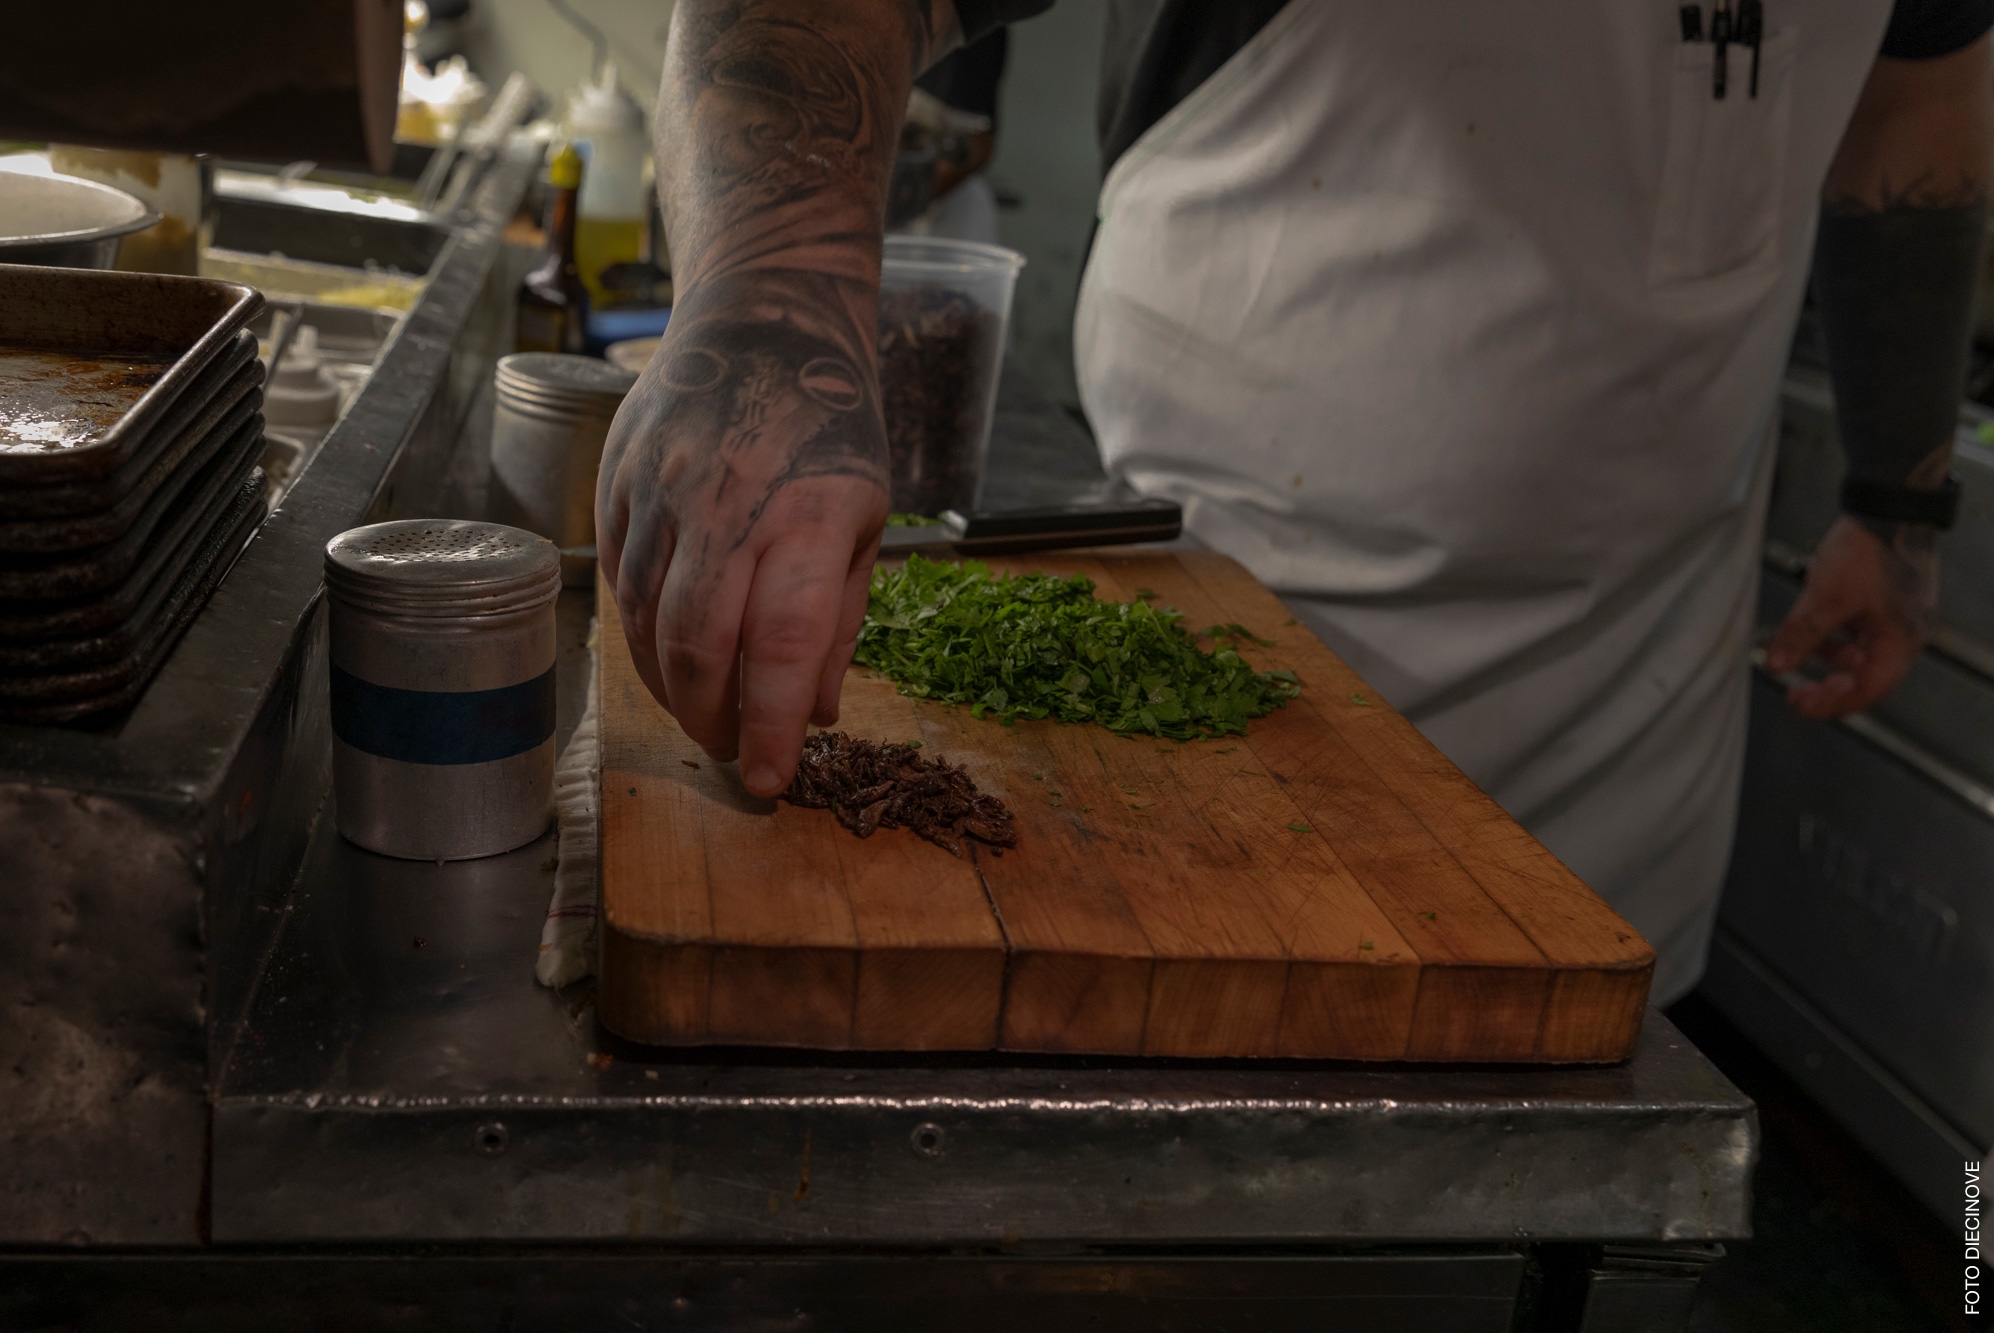 inside a kitchen a tattooed hand prepares insects 